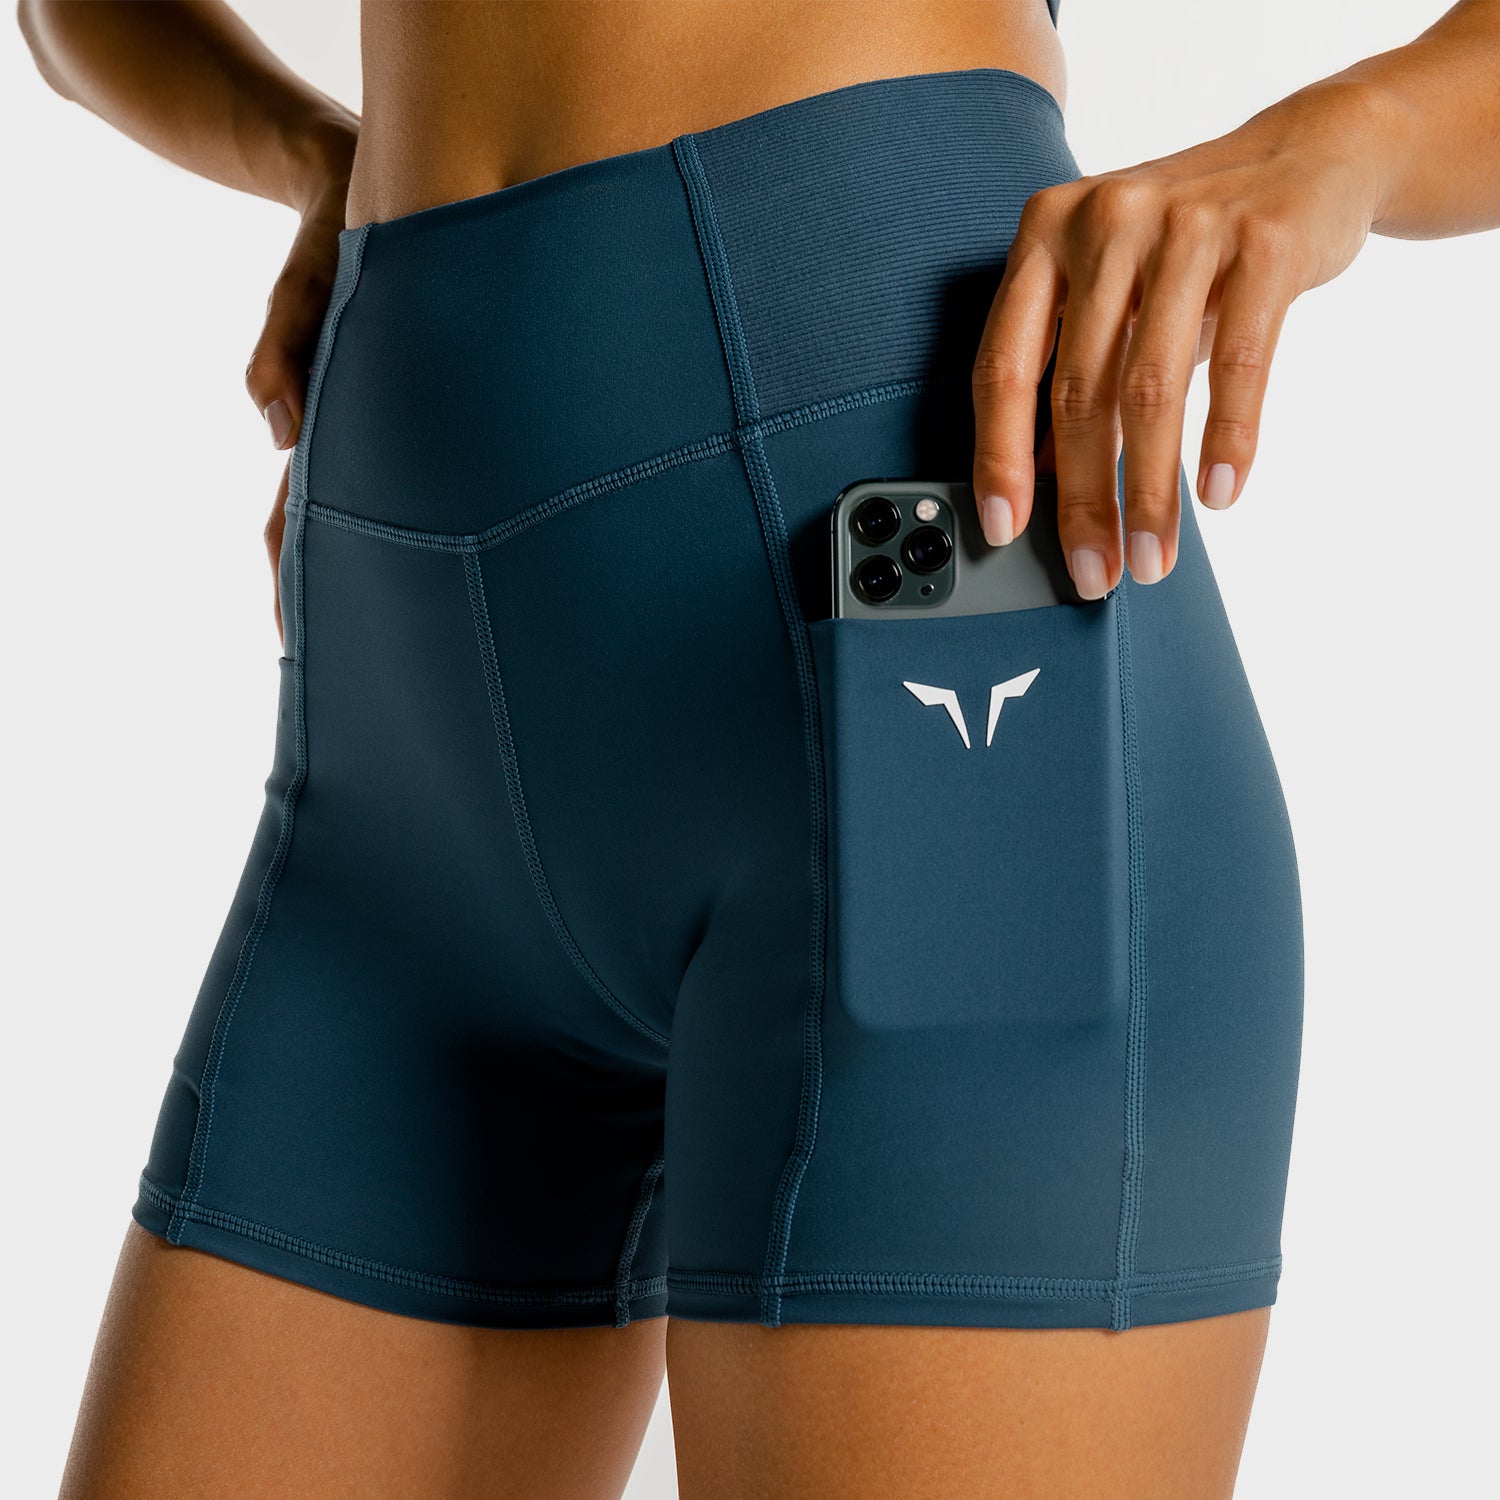 squatwolf-gym-shorts-for-women-core-performance-shorts-blue-workout-clothes